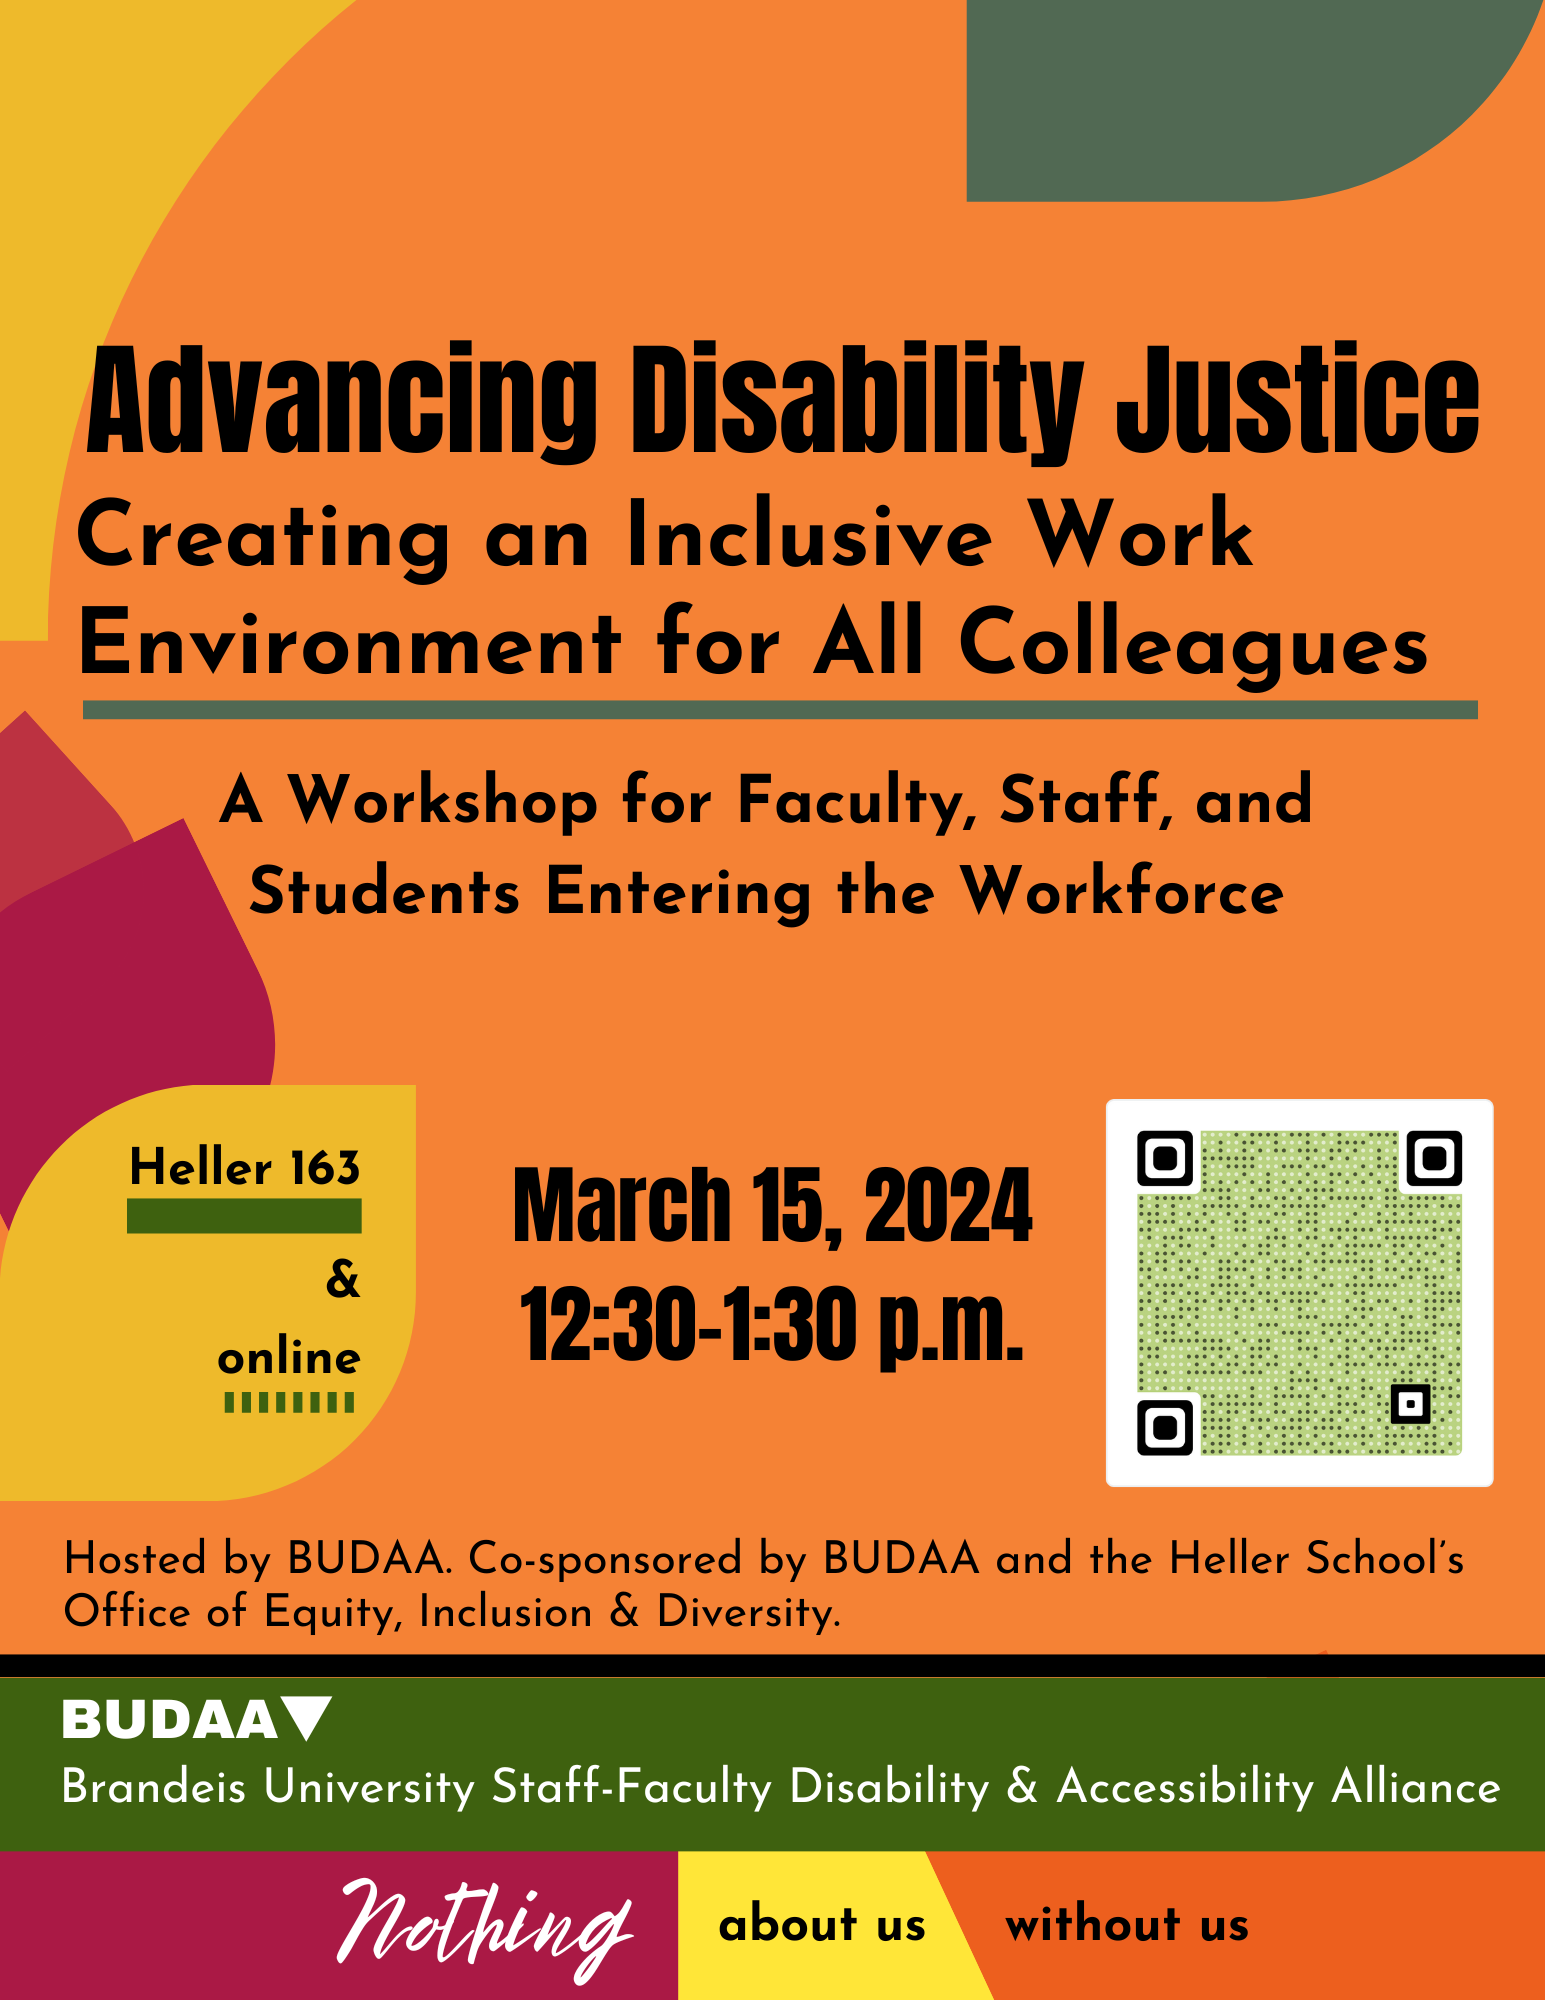 Advancing Disability Justice: Creating an Inclusive Work Environment for All Colleagues